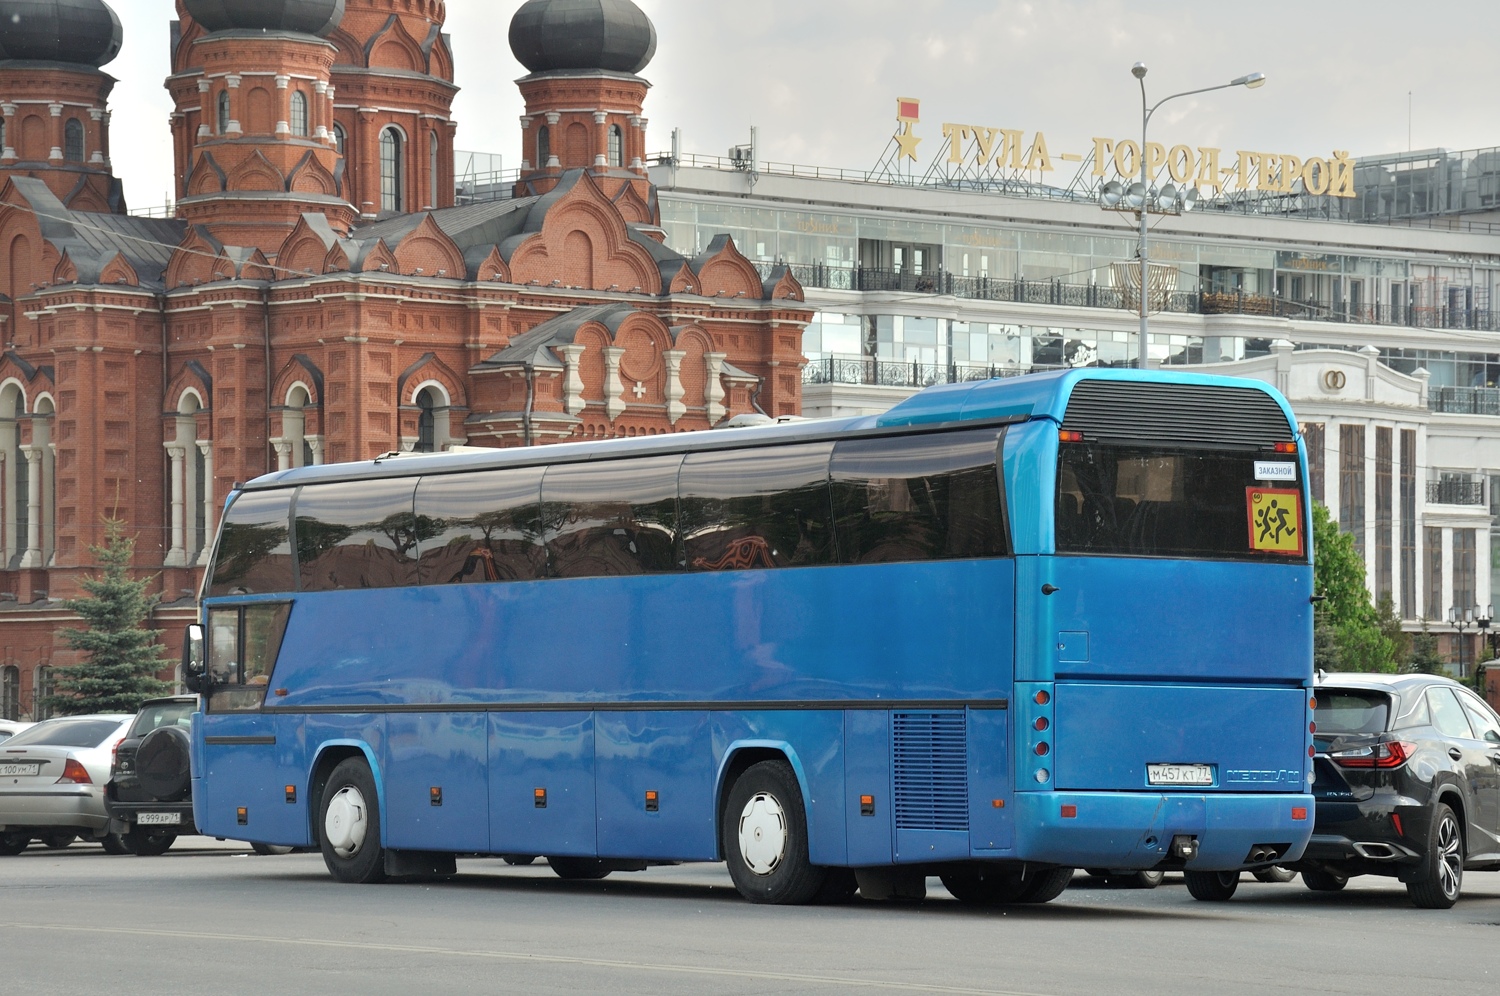 Moscow, Neoplan N116 Cityliner # М 457 КТ 77